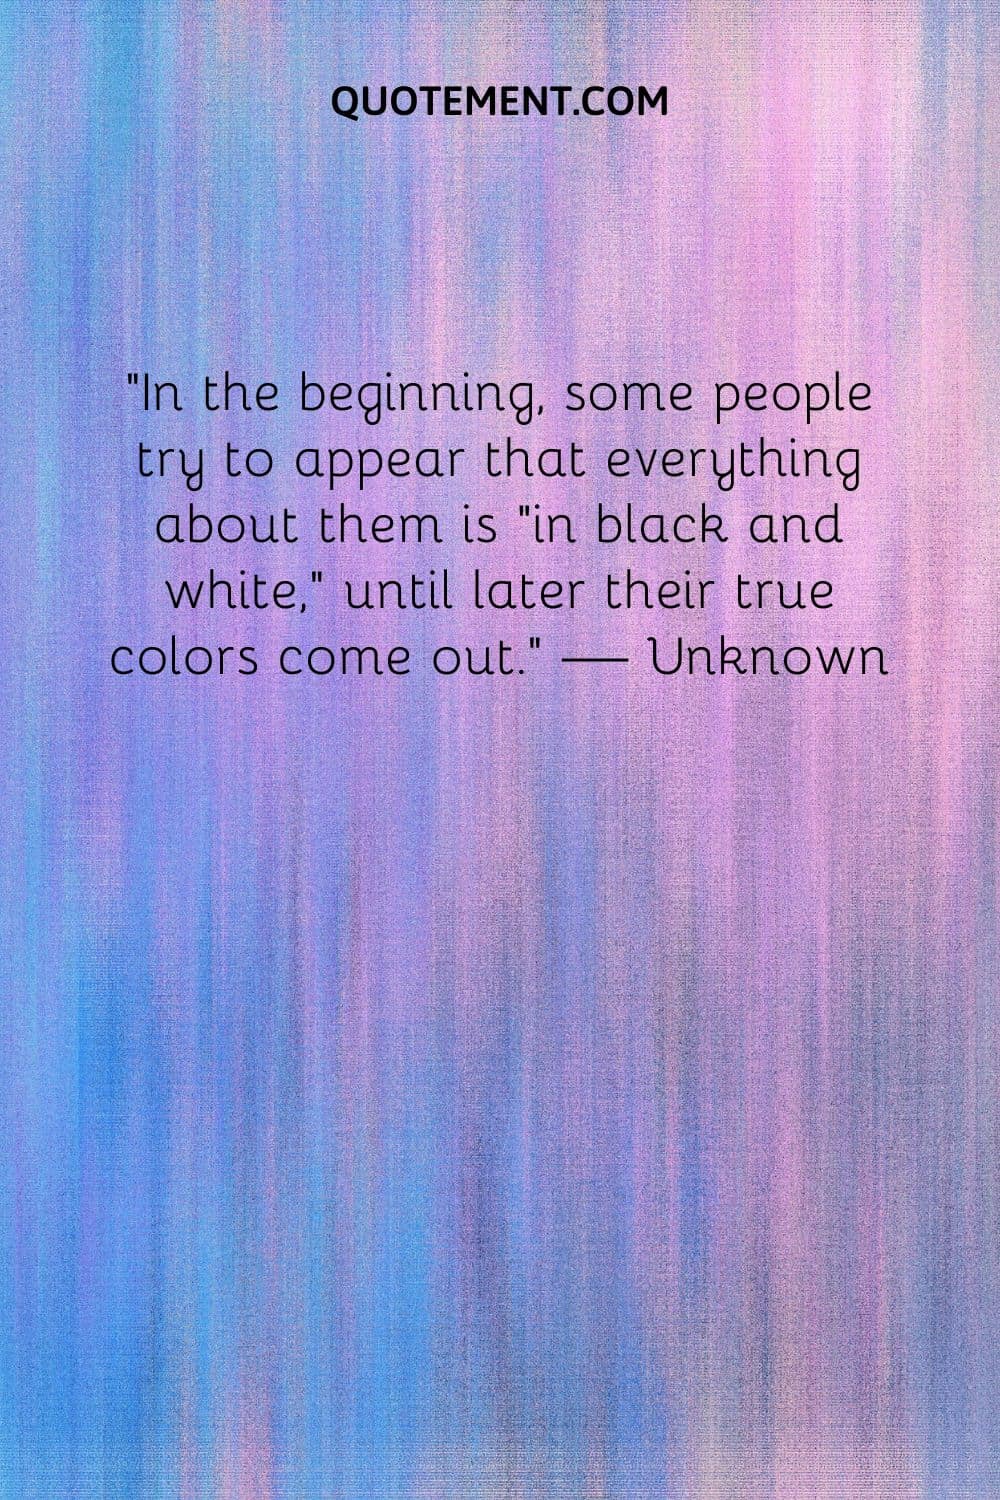 In the beginning, some people try to appear that everything about them is “in black and white,” until later their true colors come out